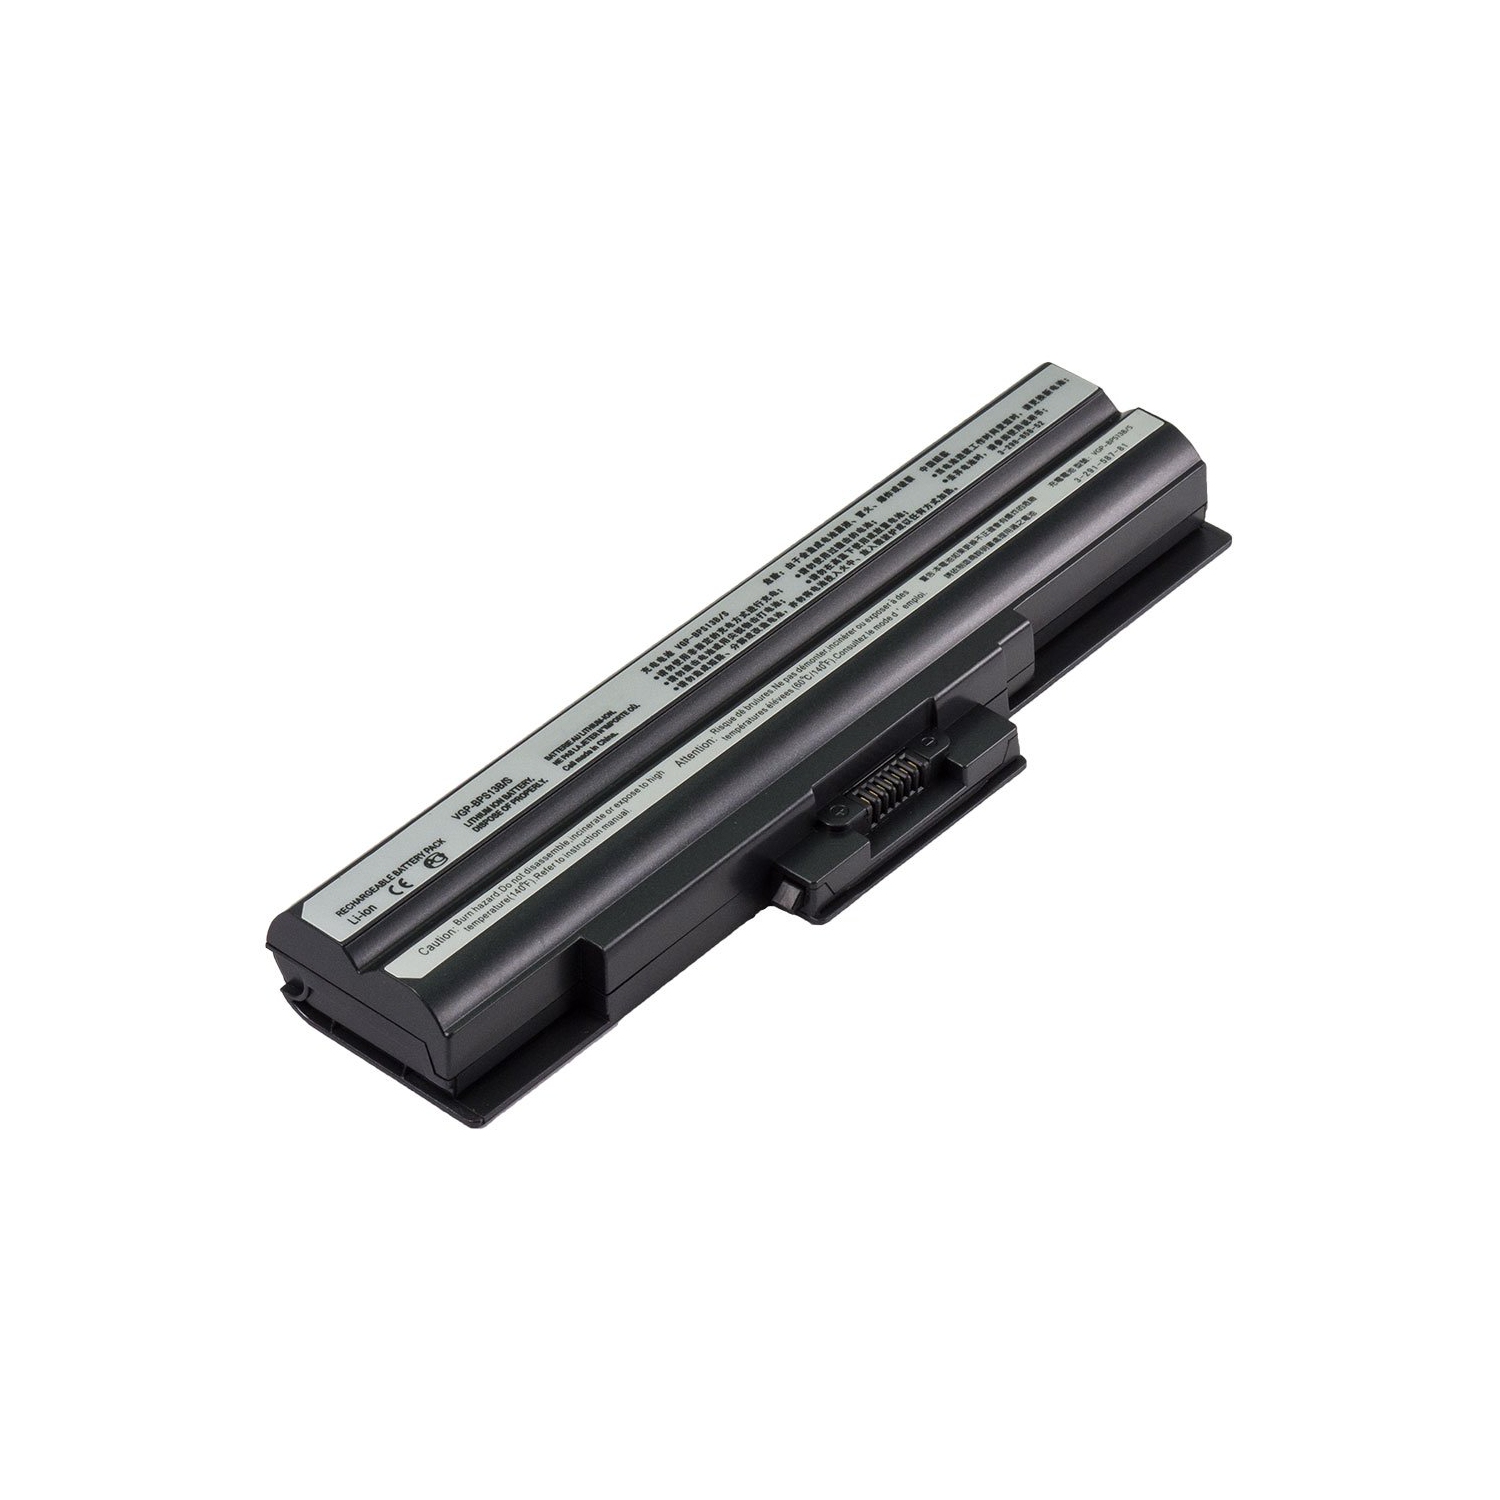 Laptop Battery Replacement for Sony VAIO VGN-SR130E/P, VGP-BPL13, VGP-BPS13/Q, VGP-BPS13A/B, VGP-BPS13A/S, VGP-BPS13A